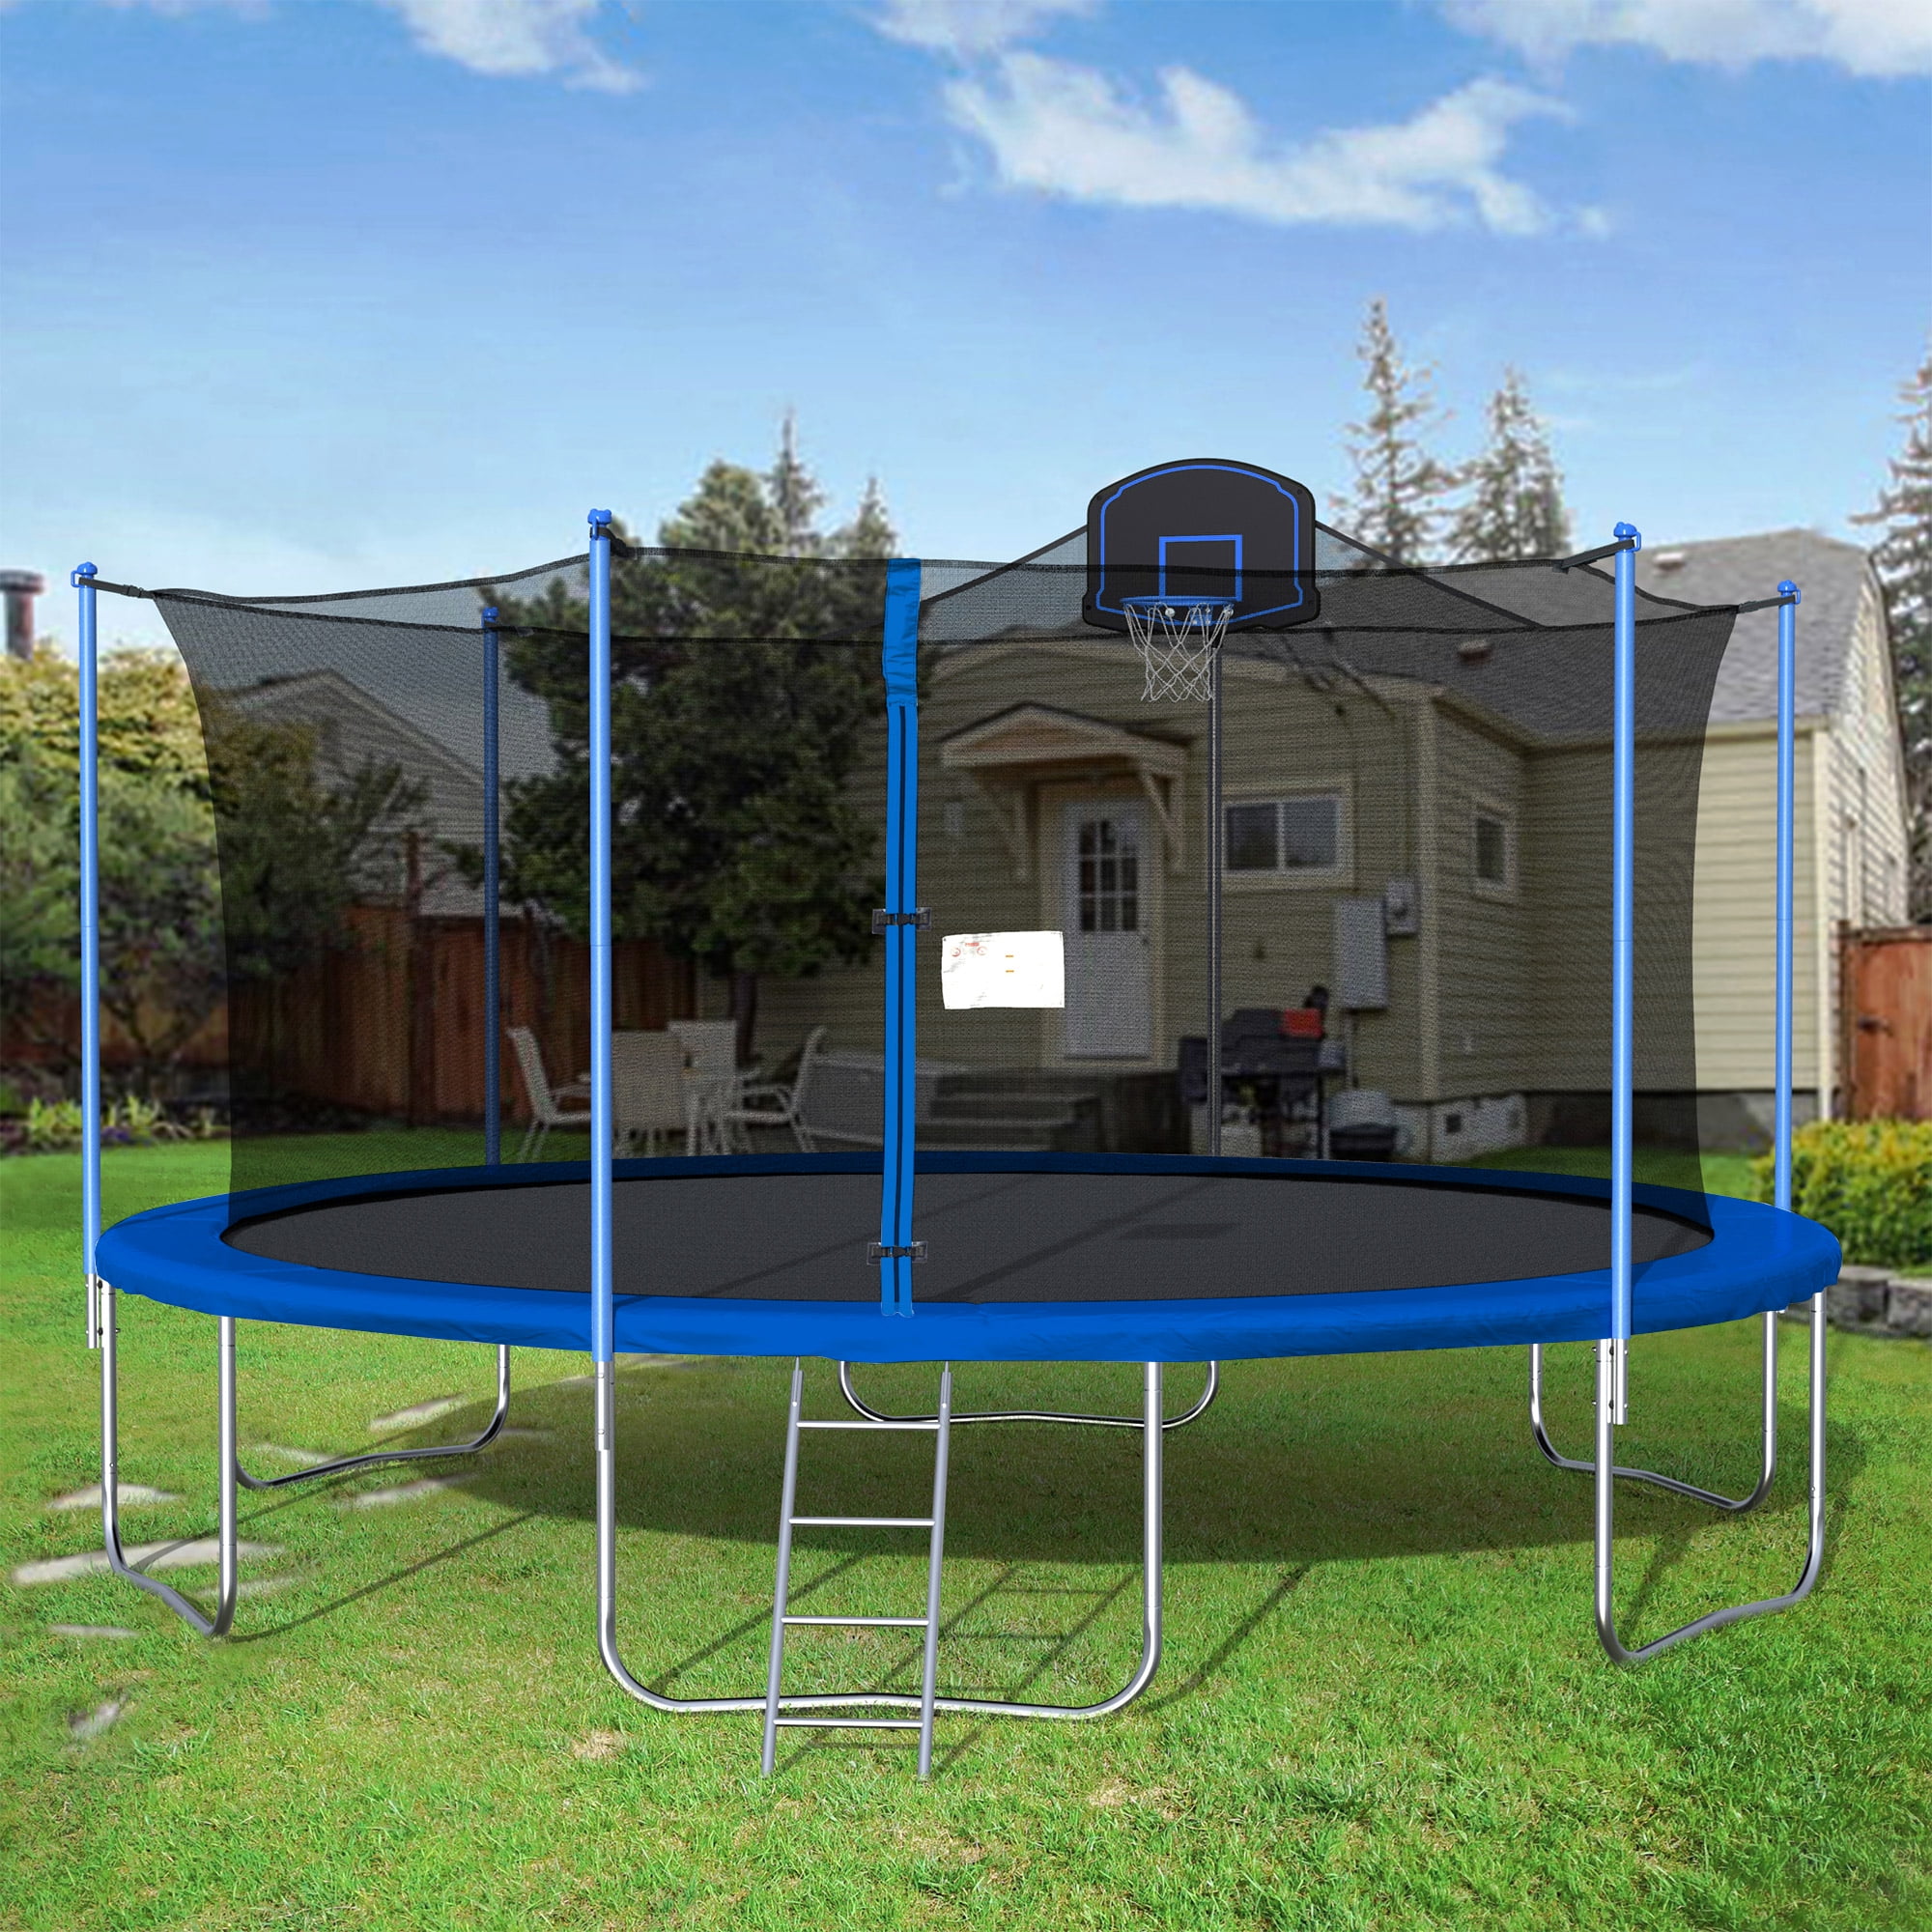 16&amp;#39; Round Trampoline for Kids, New Upgraded Outdoor Trampoline with Safety Enclosure Net, Basketball Hoop and Ladder, Heavy-Duty Trampoline for Indoor or Outdoor Backyard, Capacity 375lbs, L4725